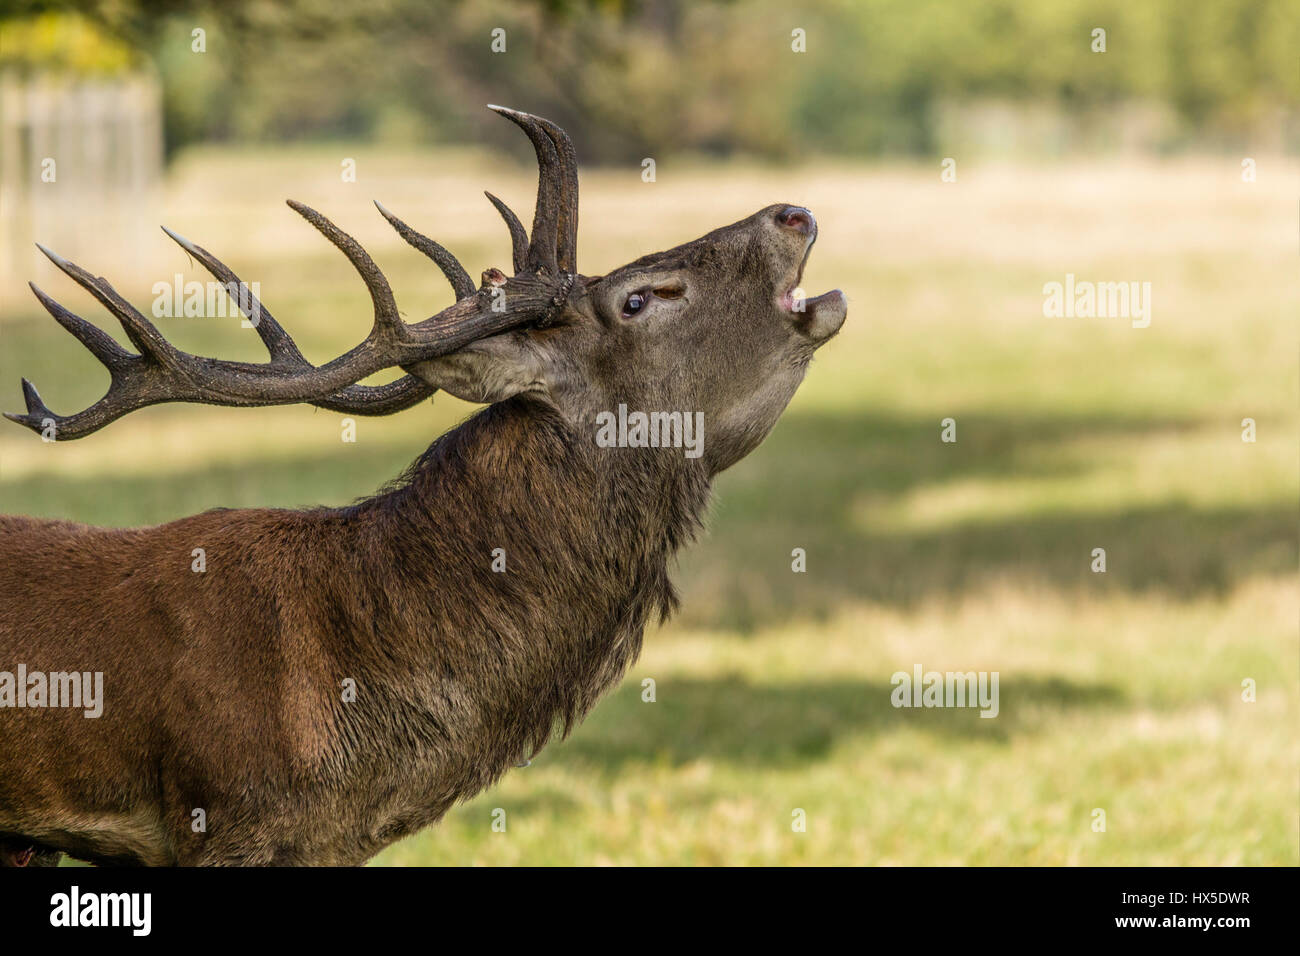 Red Deer (Cervus elaphus). Pictures were taken during the deer rut. It's a very exciting time for deer and a lot for photographers. Stock Photo